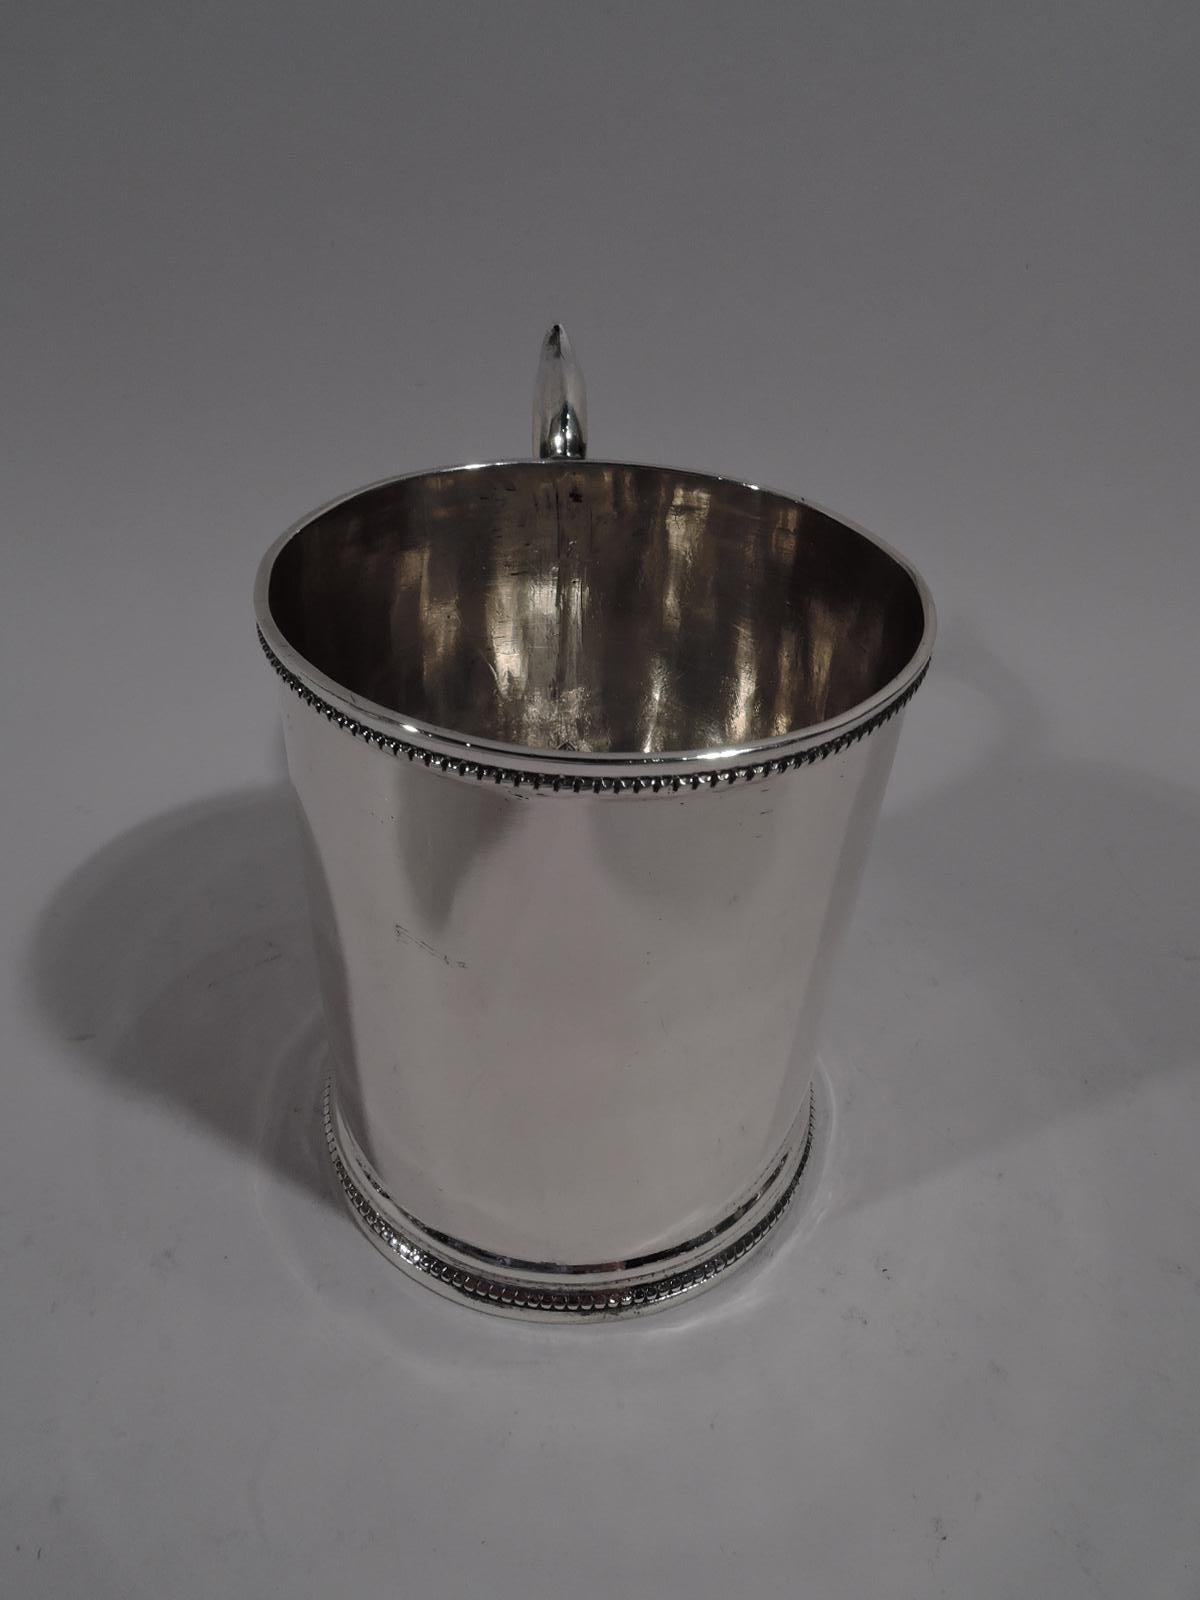 American classical coin silver baby cup, circa 1850. Plain and straight sides with beaded rims and capped S-scroll handle. Lots and lots of room for engraving. Marked underside: “Premium of the / Ills State Agl Society”.

Overall dimensions: H 4 x